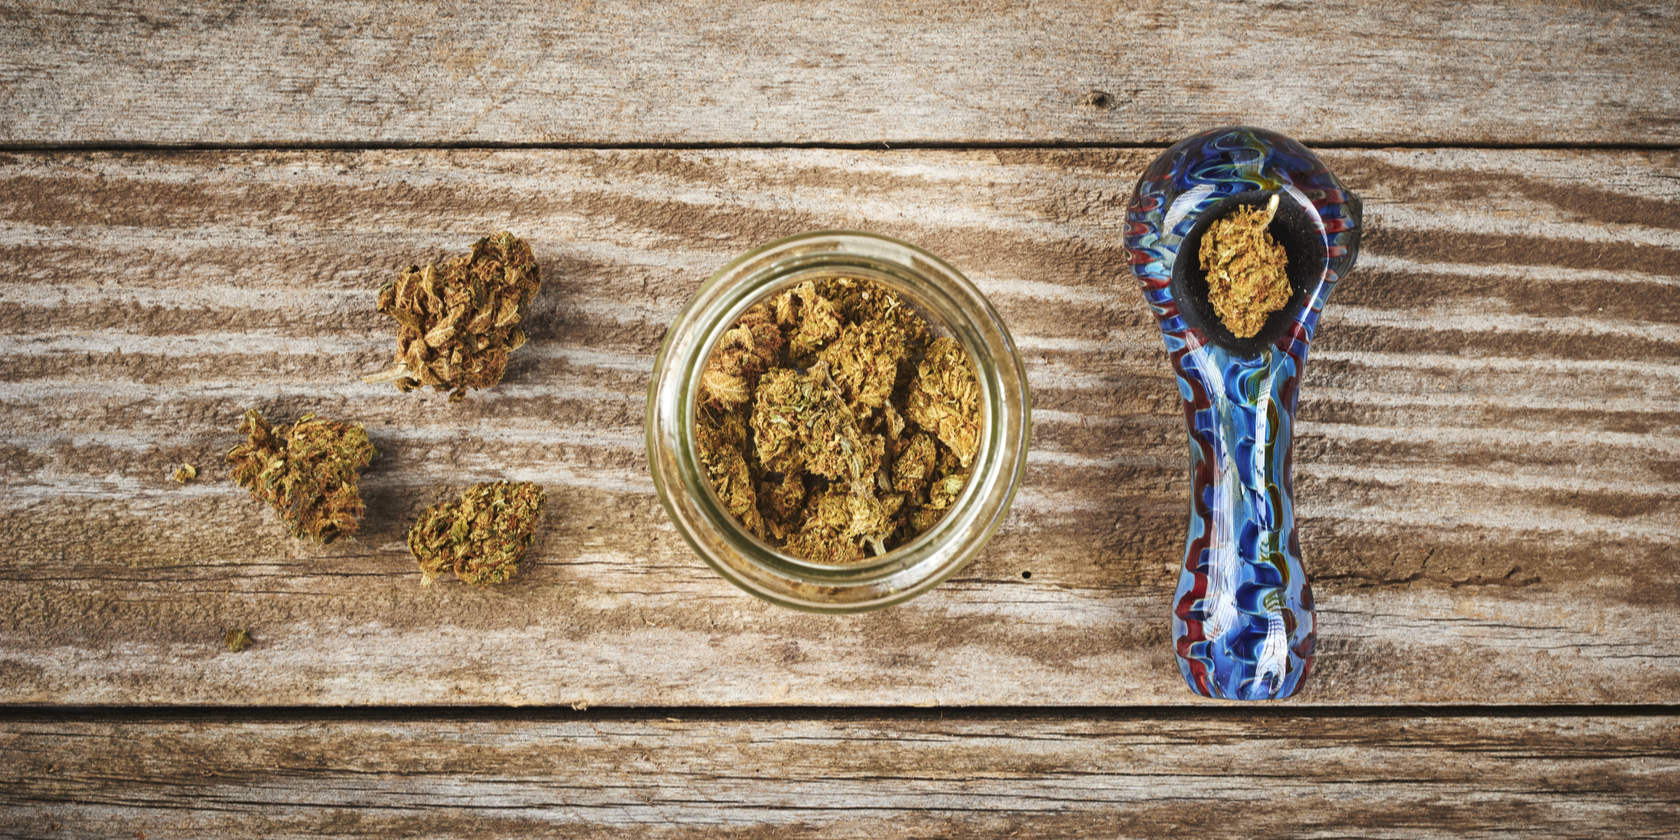 Marijuana Pipes: Learn About Aspects to Select Your Pipe